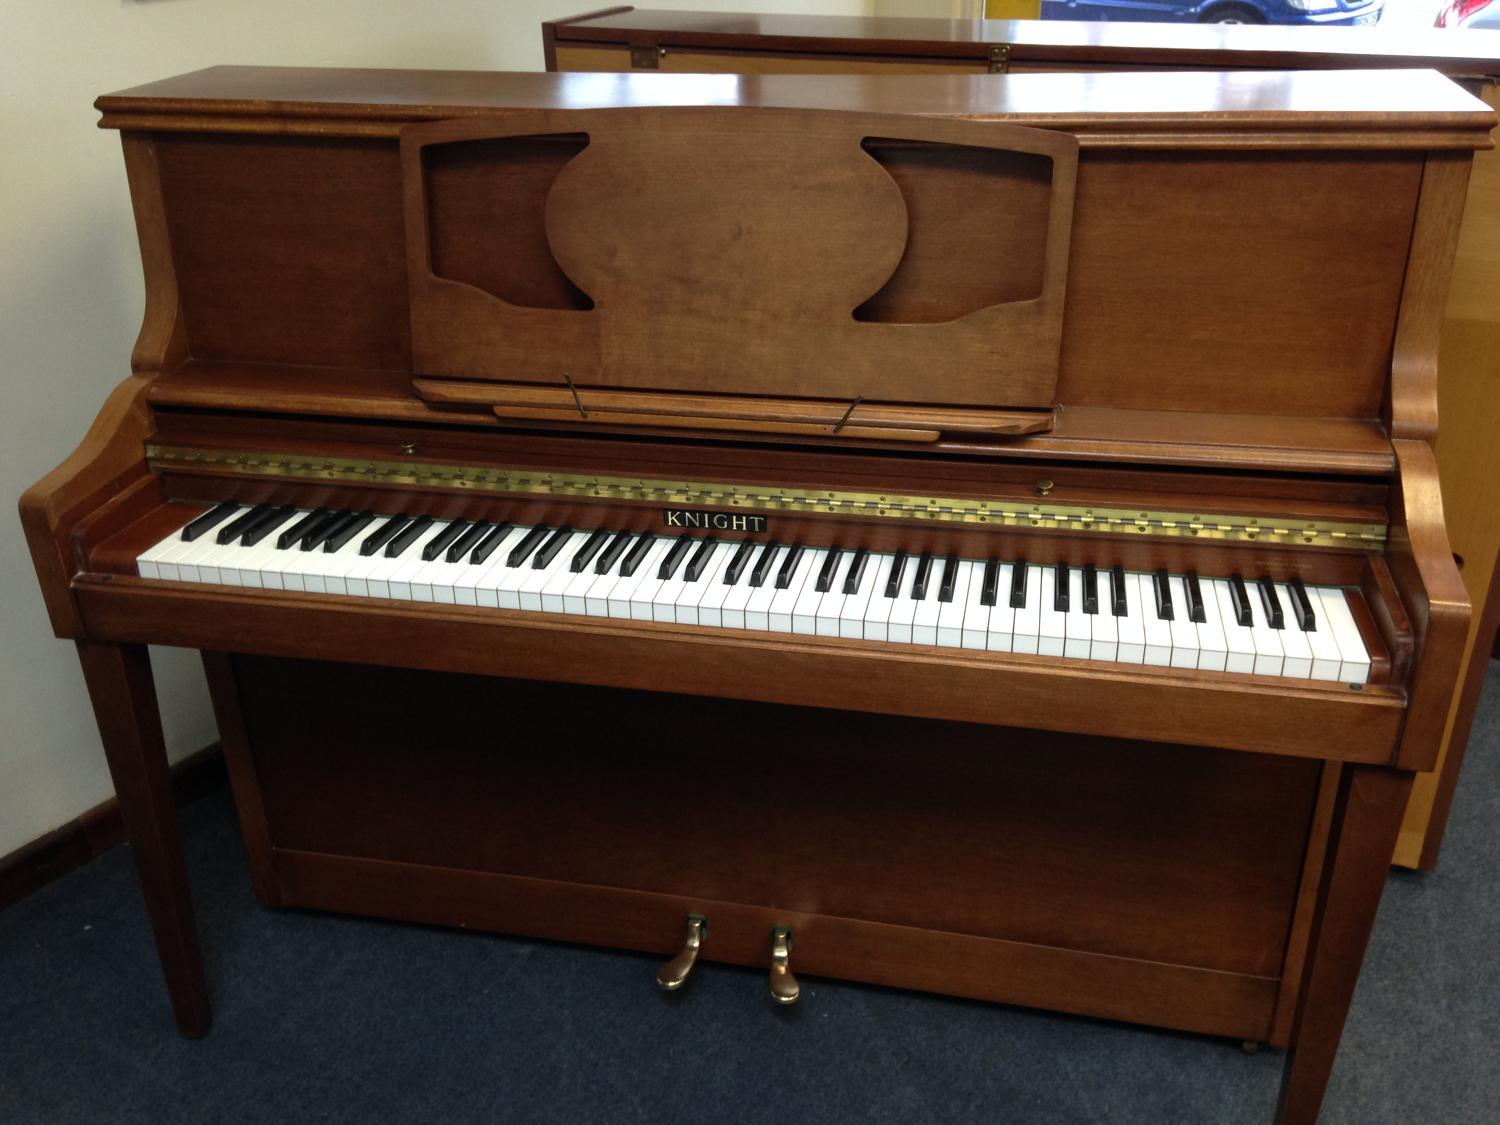 Knight K30 piano for sale